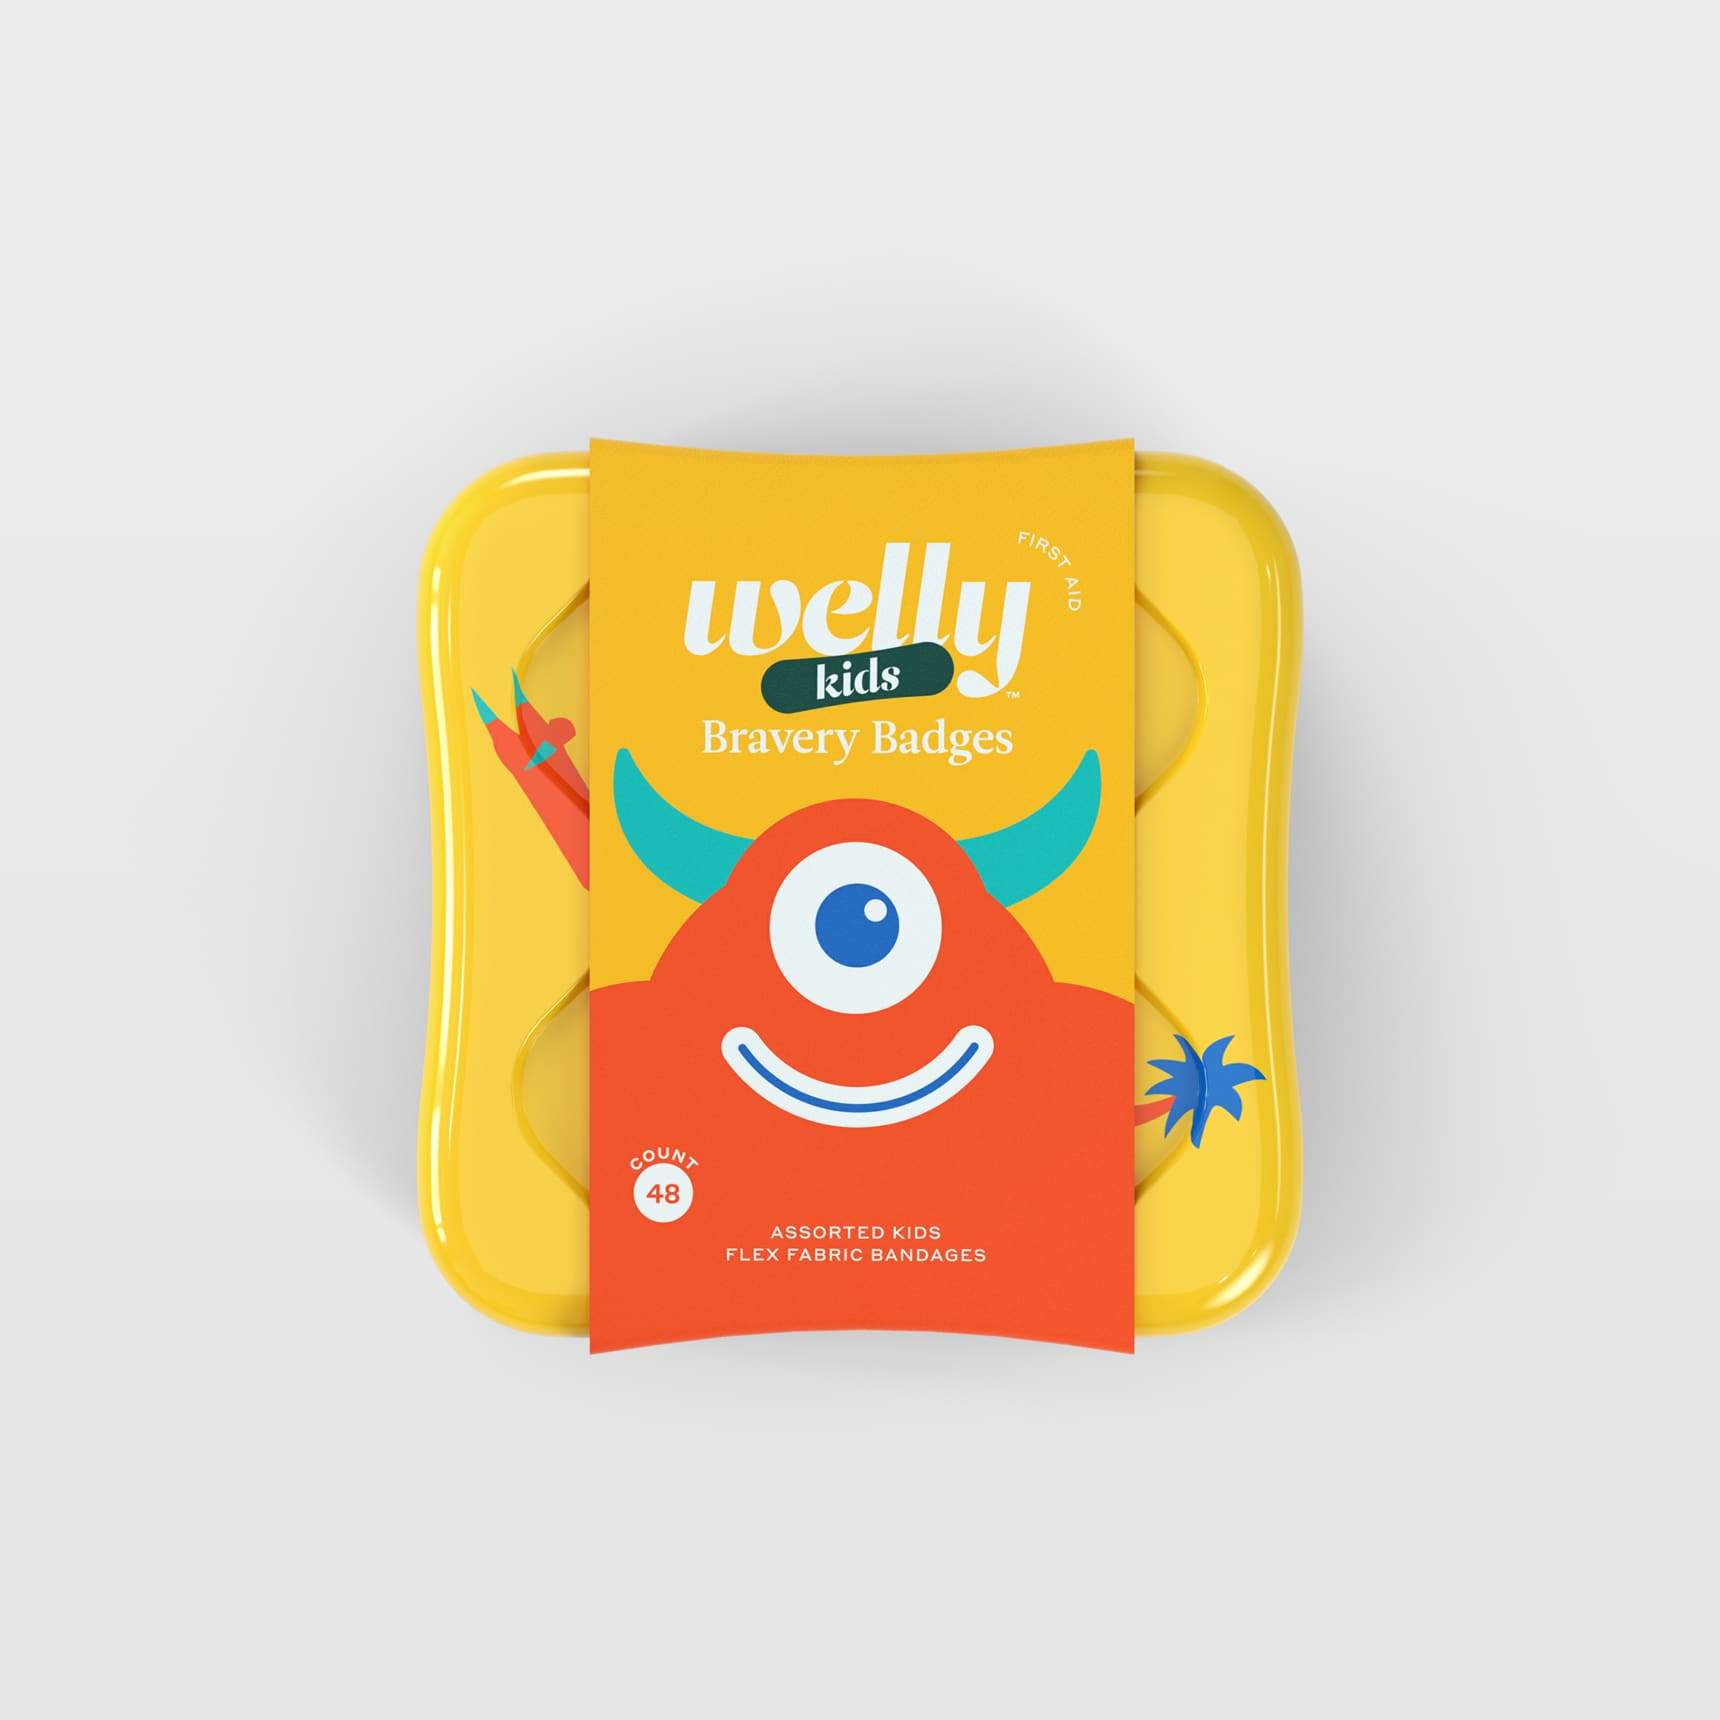 Welly | Bravery Badges - Monsters 48pk